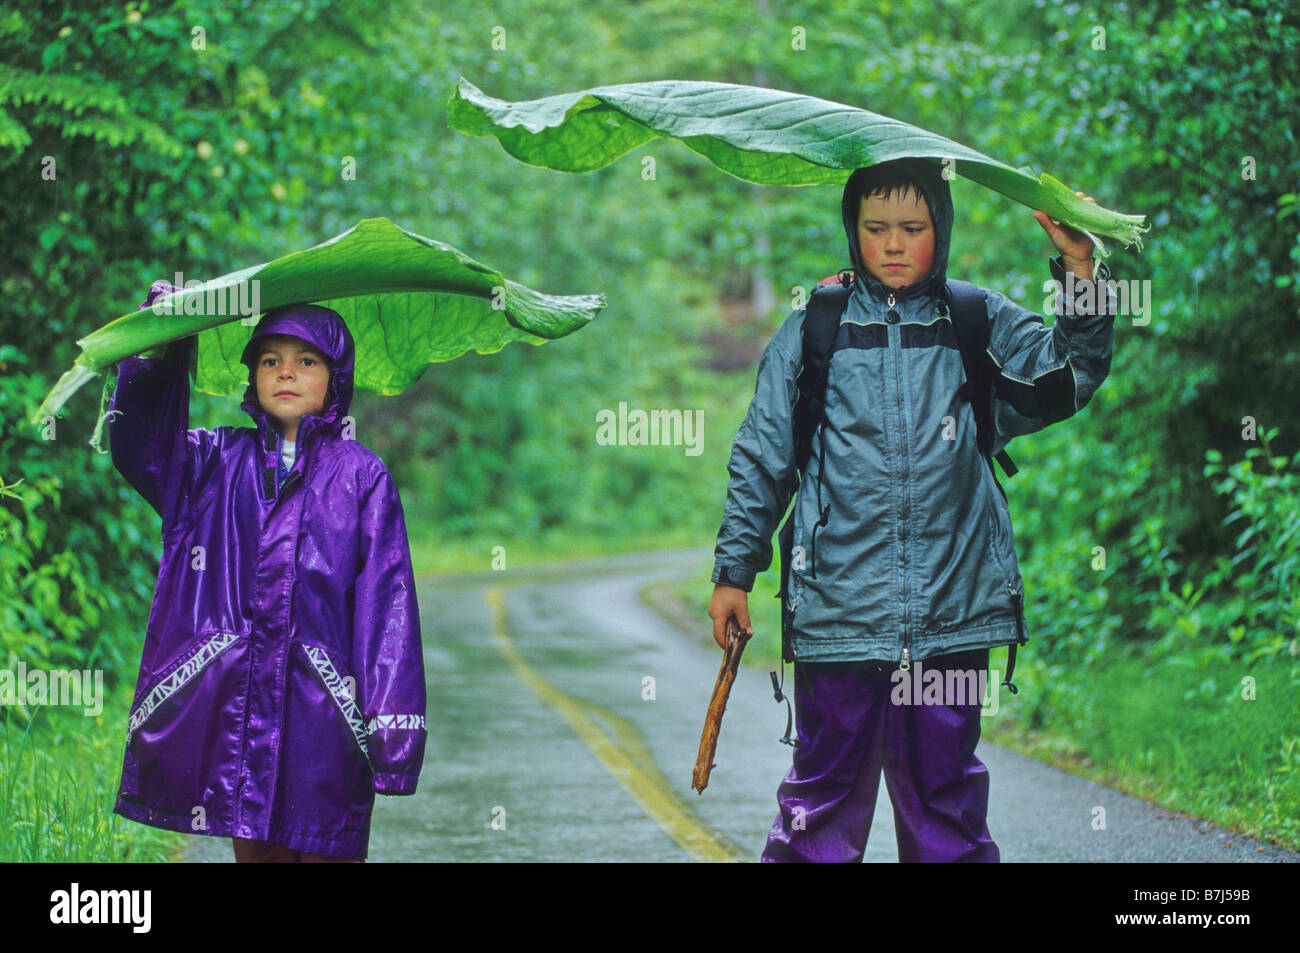 Boy, 7, and girl, 4, hold giant Skunk Cabbage leaves as umbrellas, Whistler, BC Canada Stock Photo